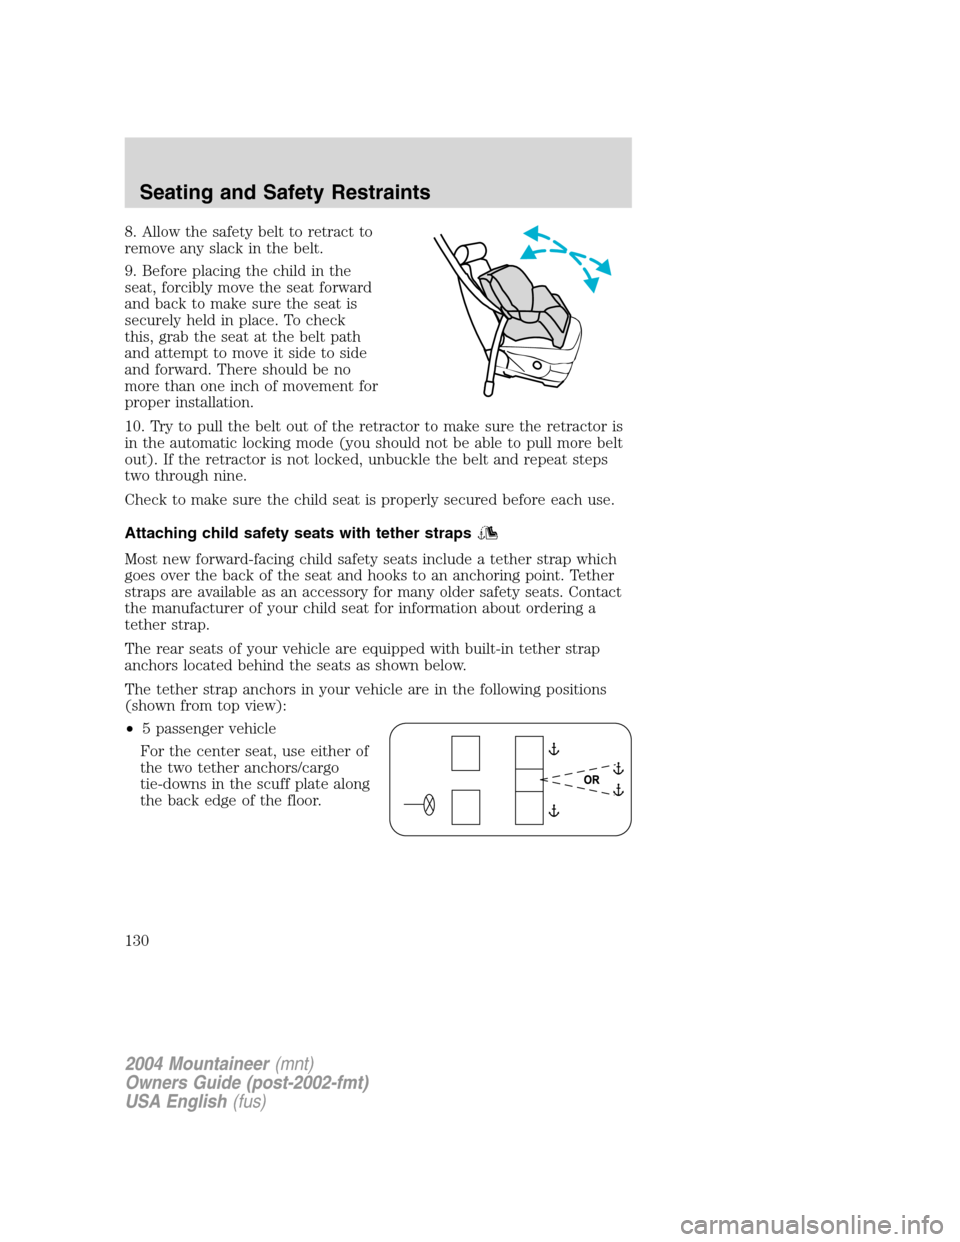 Mercury Mountaineer 2004  Owners Manuals 8. Allow the safety belt to retract to
remove any slack in the belt.
9. Before placing the child in the
seat, forcibly move the seat forward
and back to make sure the seat is
securely held in place. T